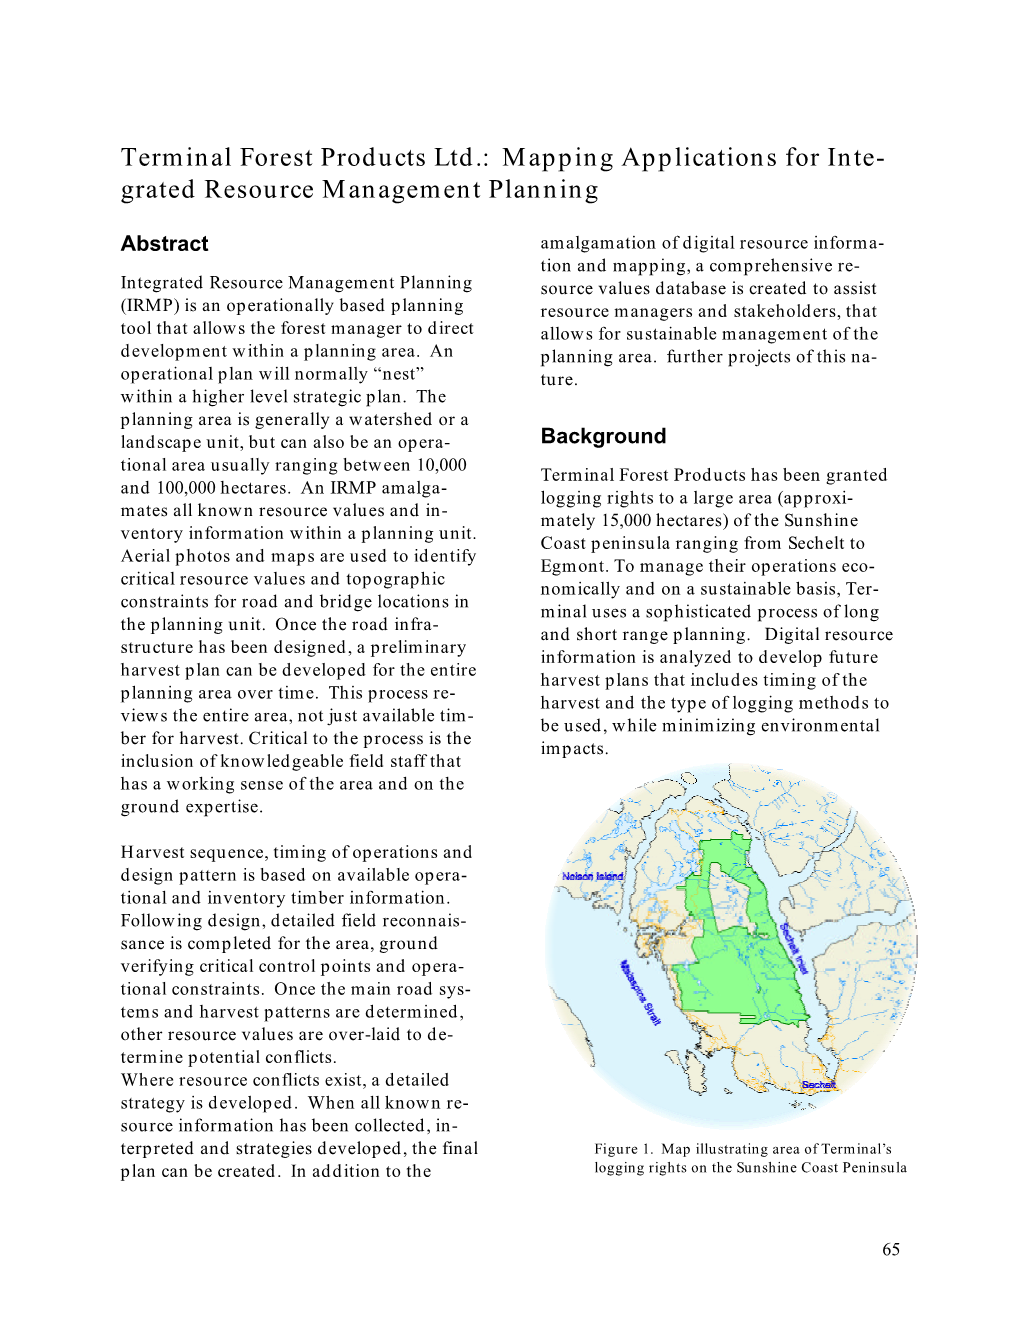 Terminal Forest Products Ltd.: Mapping Applications for Inte- Grated Resource Management Planning